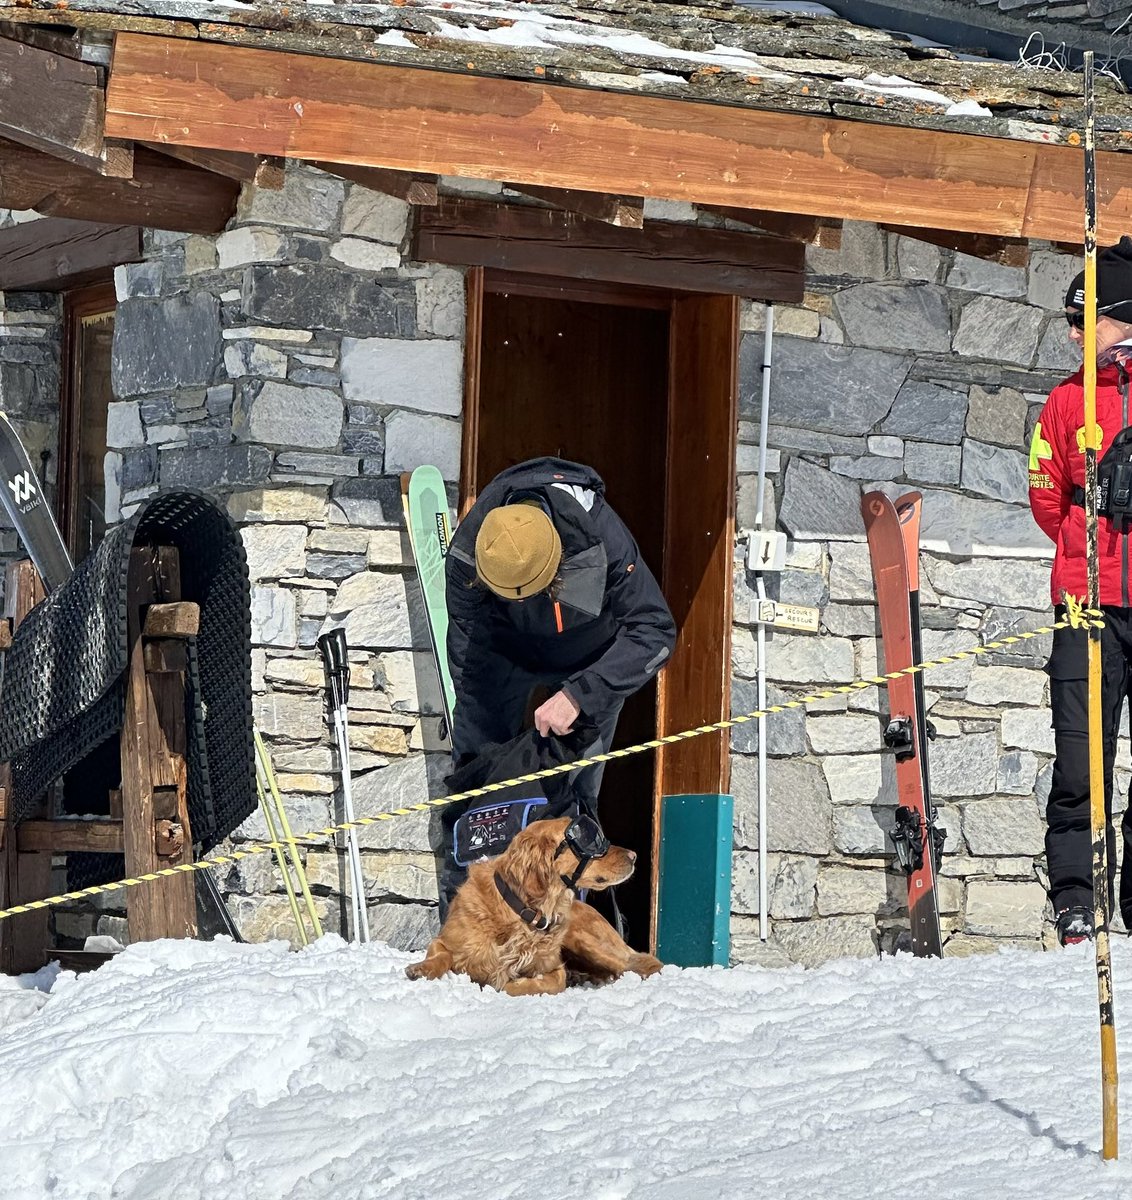 Ski patrol dogs in their goggles …